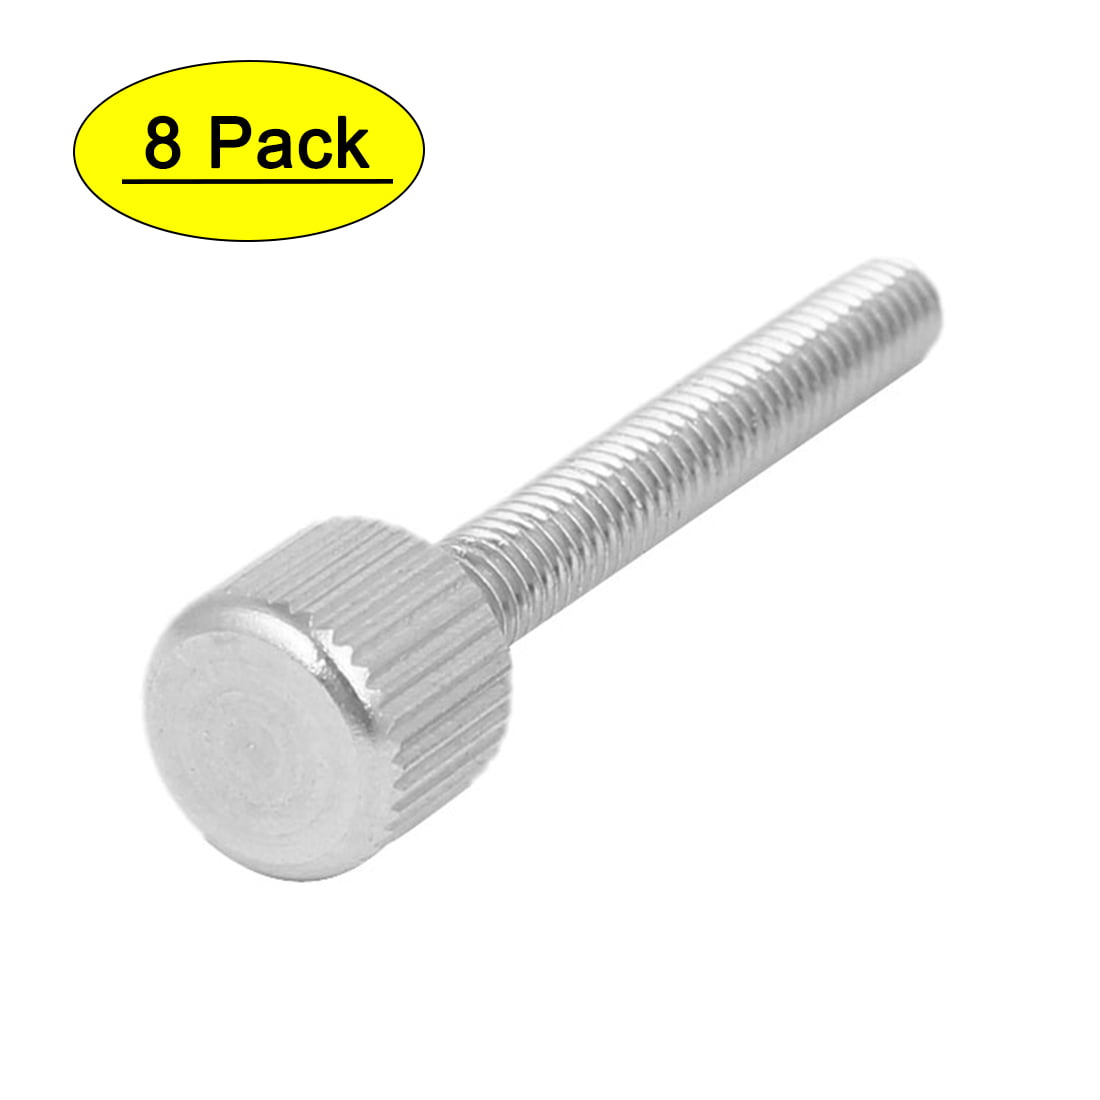 M4 Color Aluminum Alloy Knurled Thumb Screw Flat Head Bolts For PC Case computer 